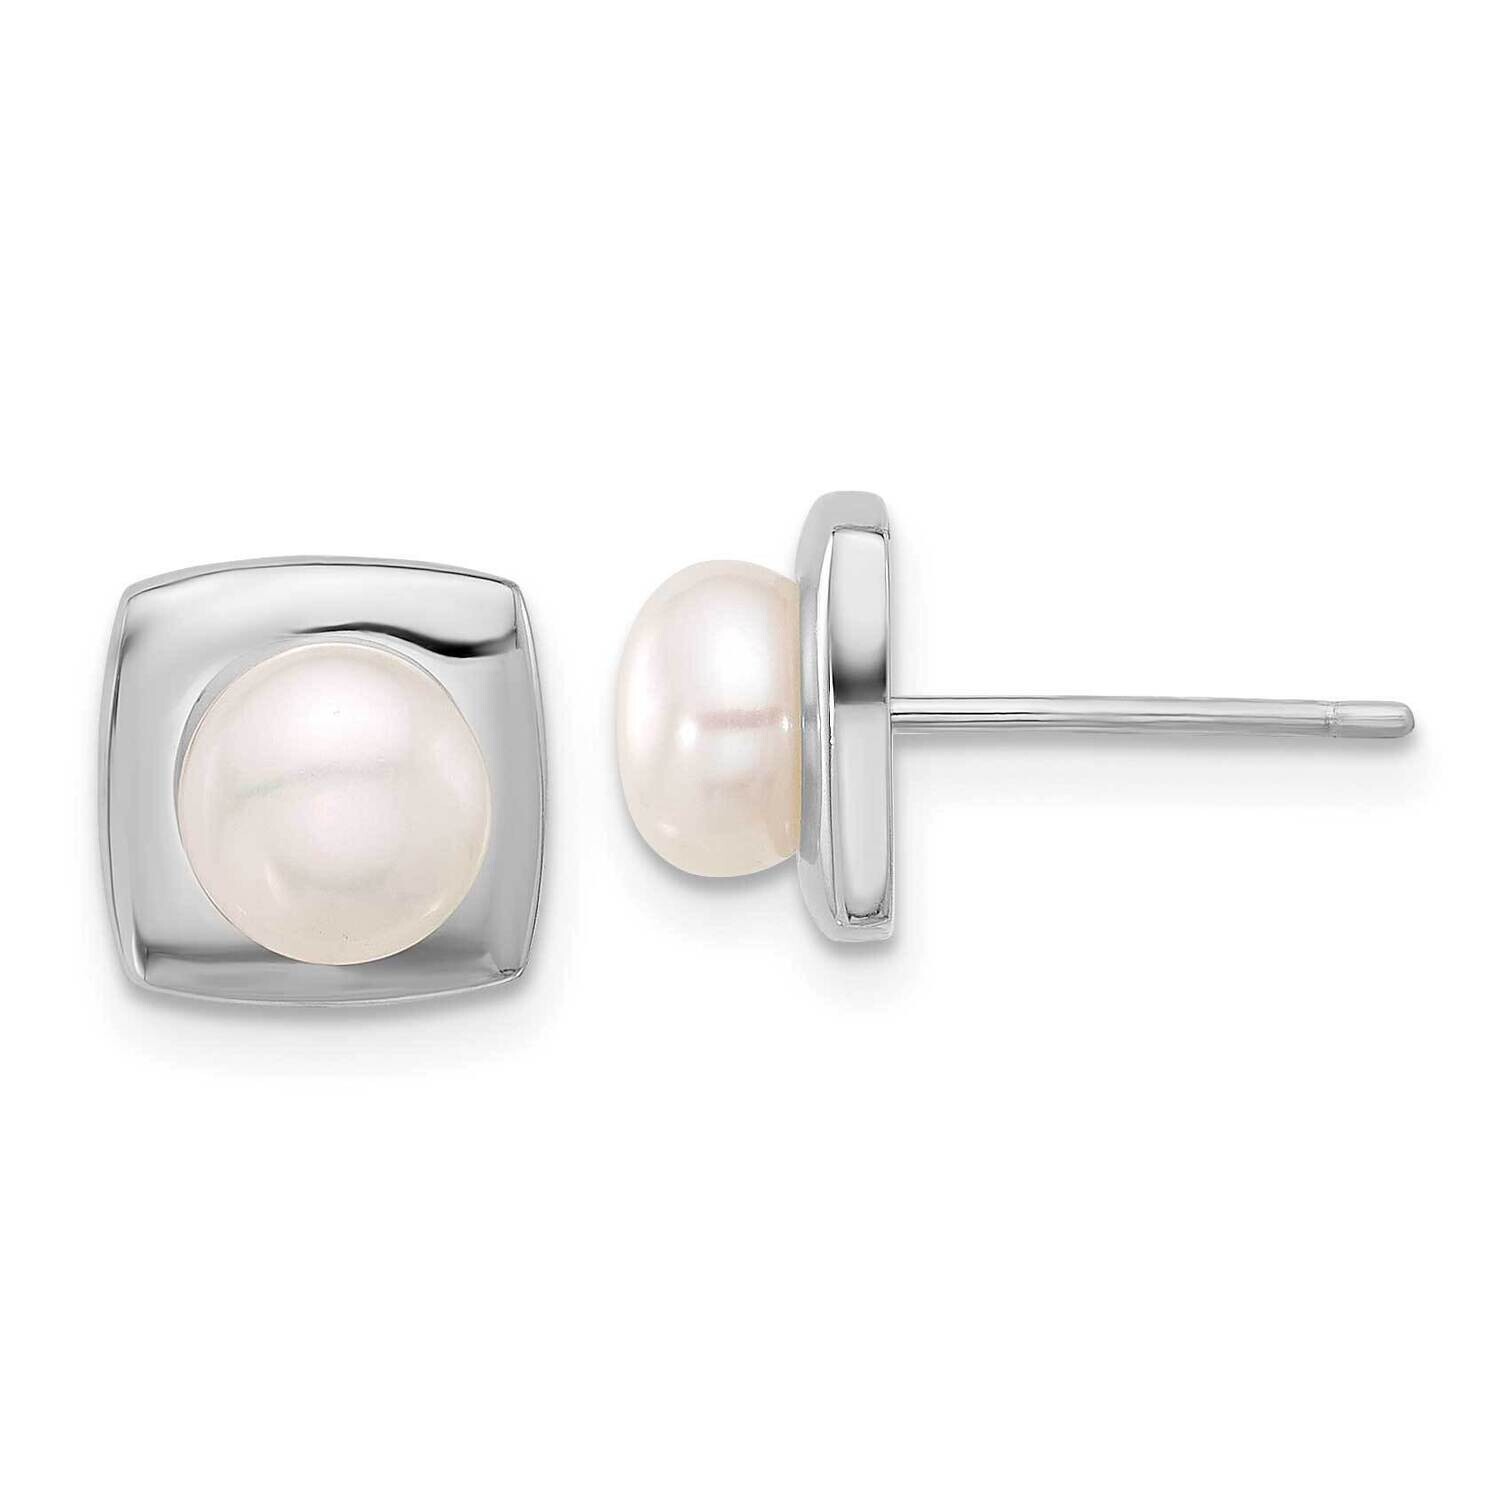 Rh-Plated 6-7mm White Fwc Pearl Square Post Earrings Sterling Silver QE17211